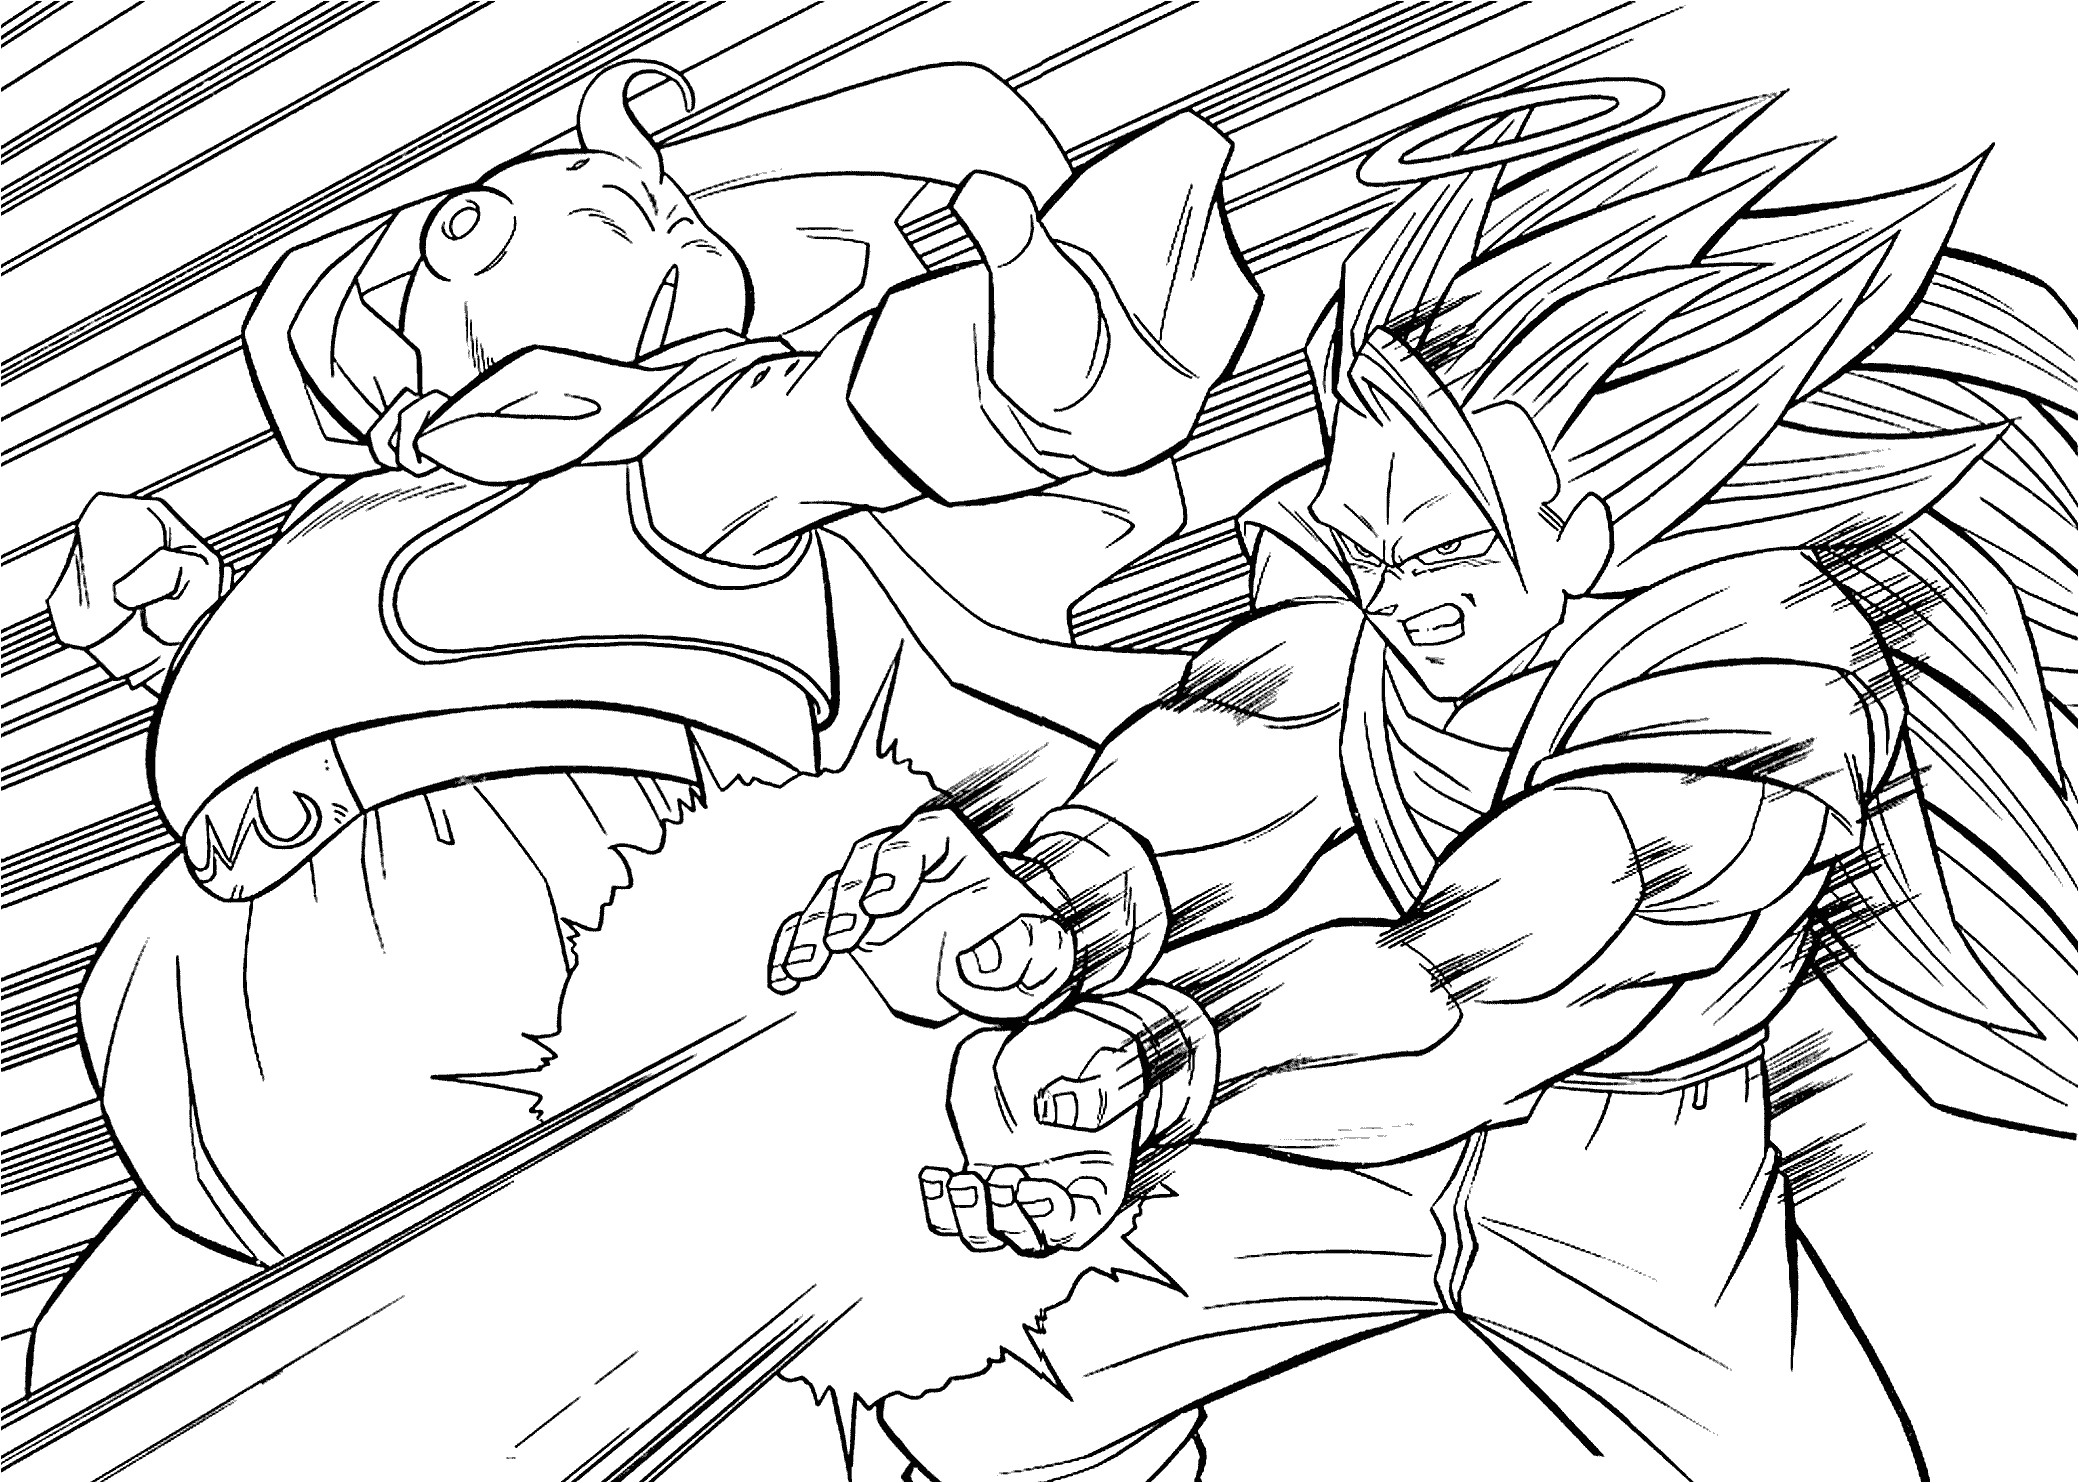 Skill Dragon Ball Super Coloring Pages Best For Kids Revisited Dragon Ball Super Coloring Pages Z Goku Saiyan From